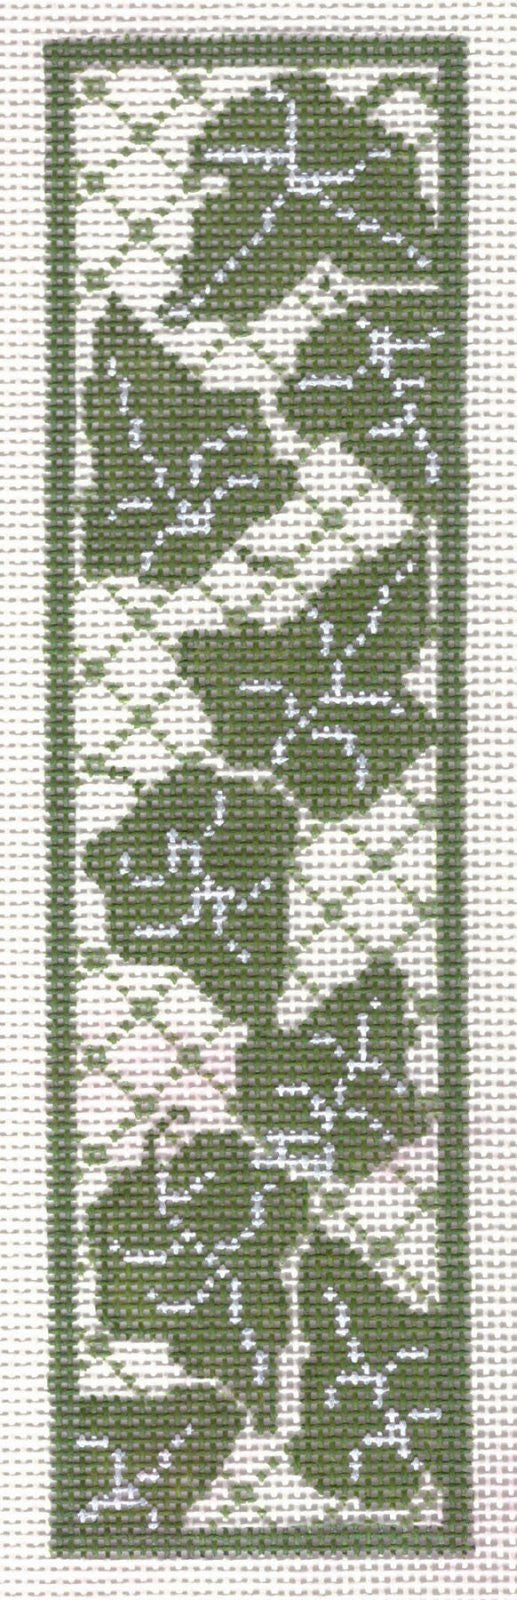 Bookmark ~ Green & White Ivy Lattice 7.25" Bookmark or CUFF Bracelet handpainted Needlepoint Canvas by Whimsy and Grace